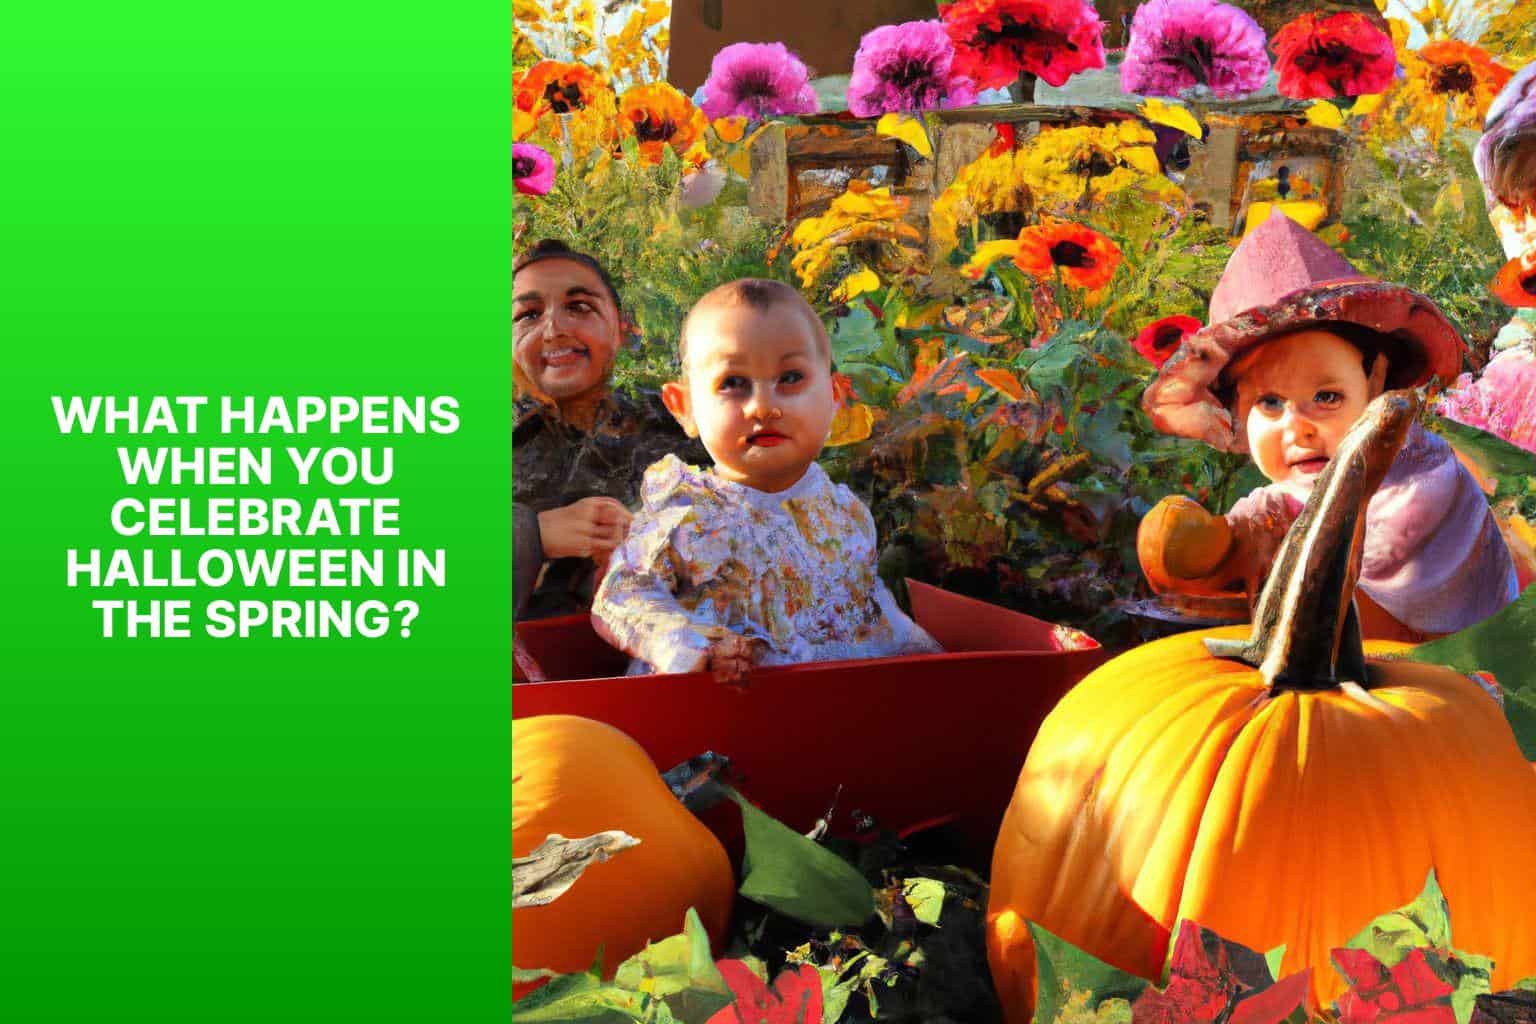 What Happens When You Celebrate Halloween in the Spring? - what happens when you celebrate halloween in the spring 